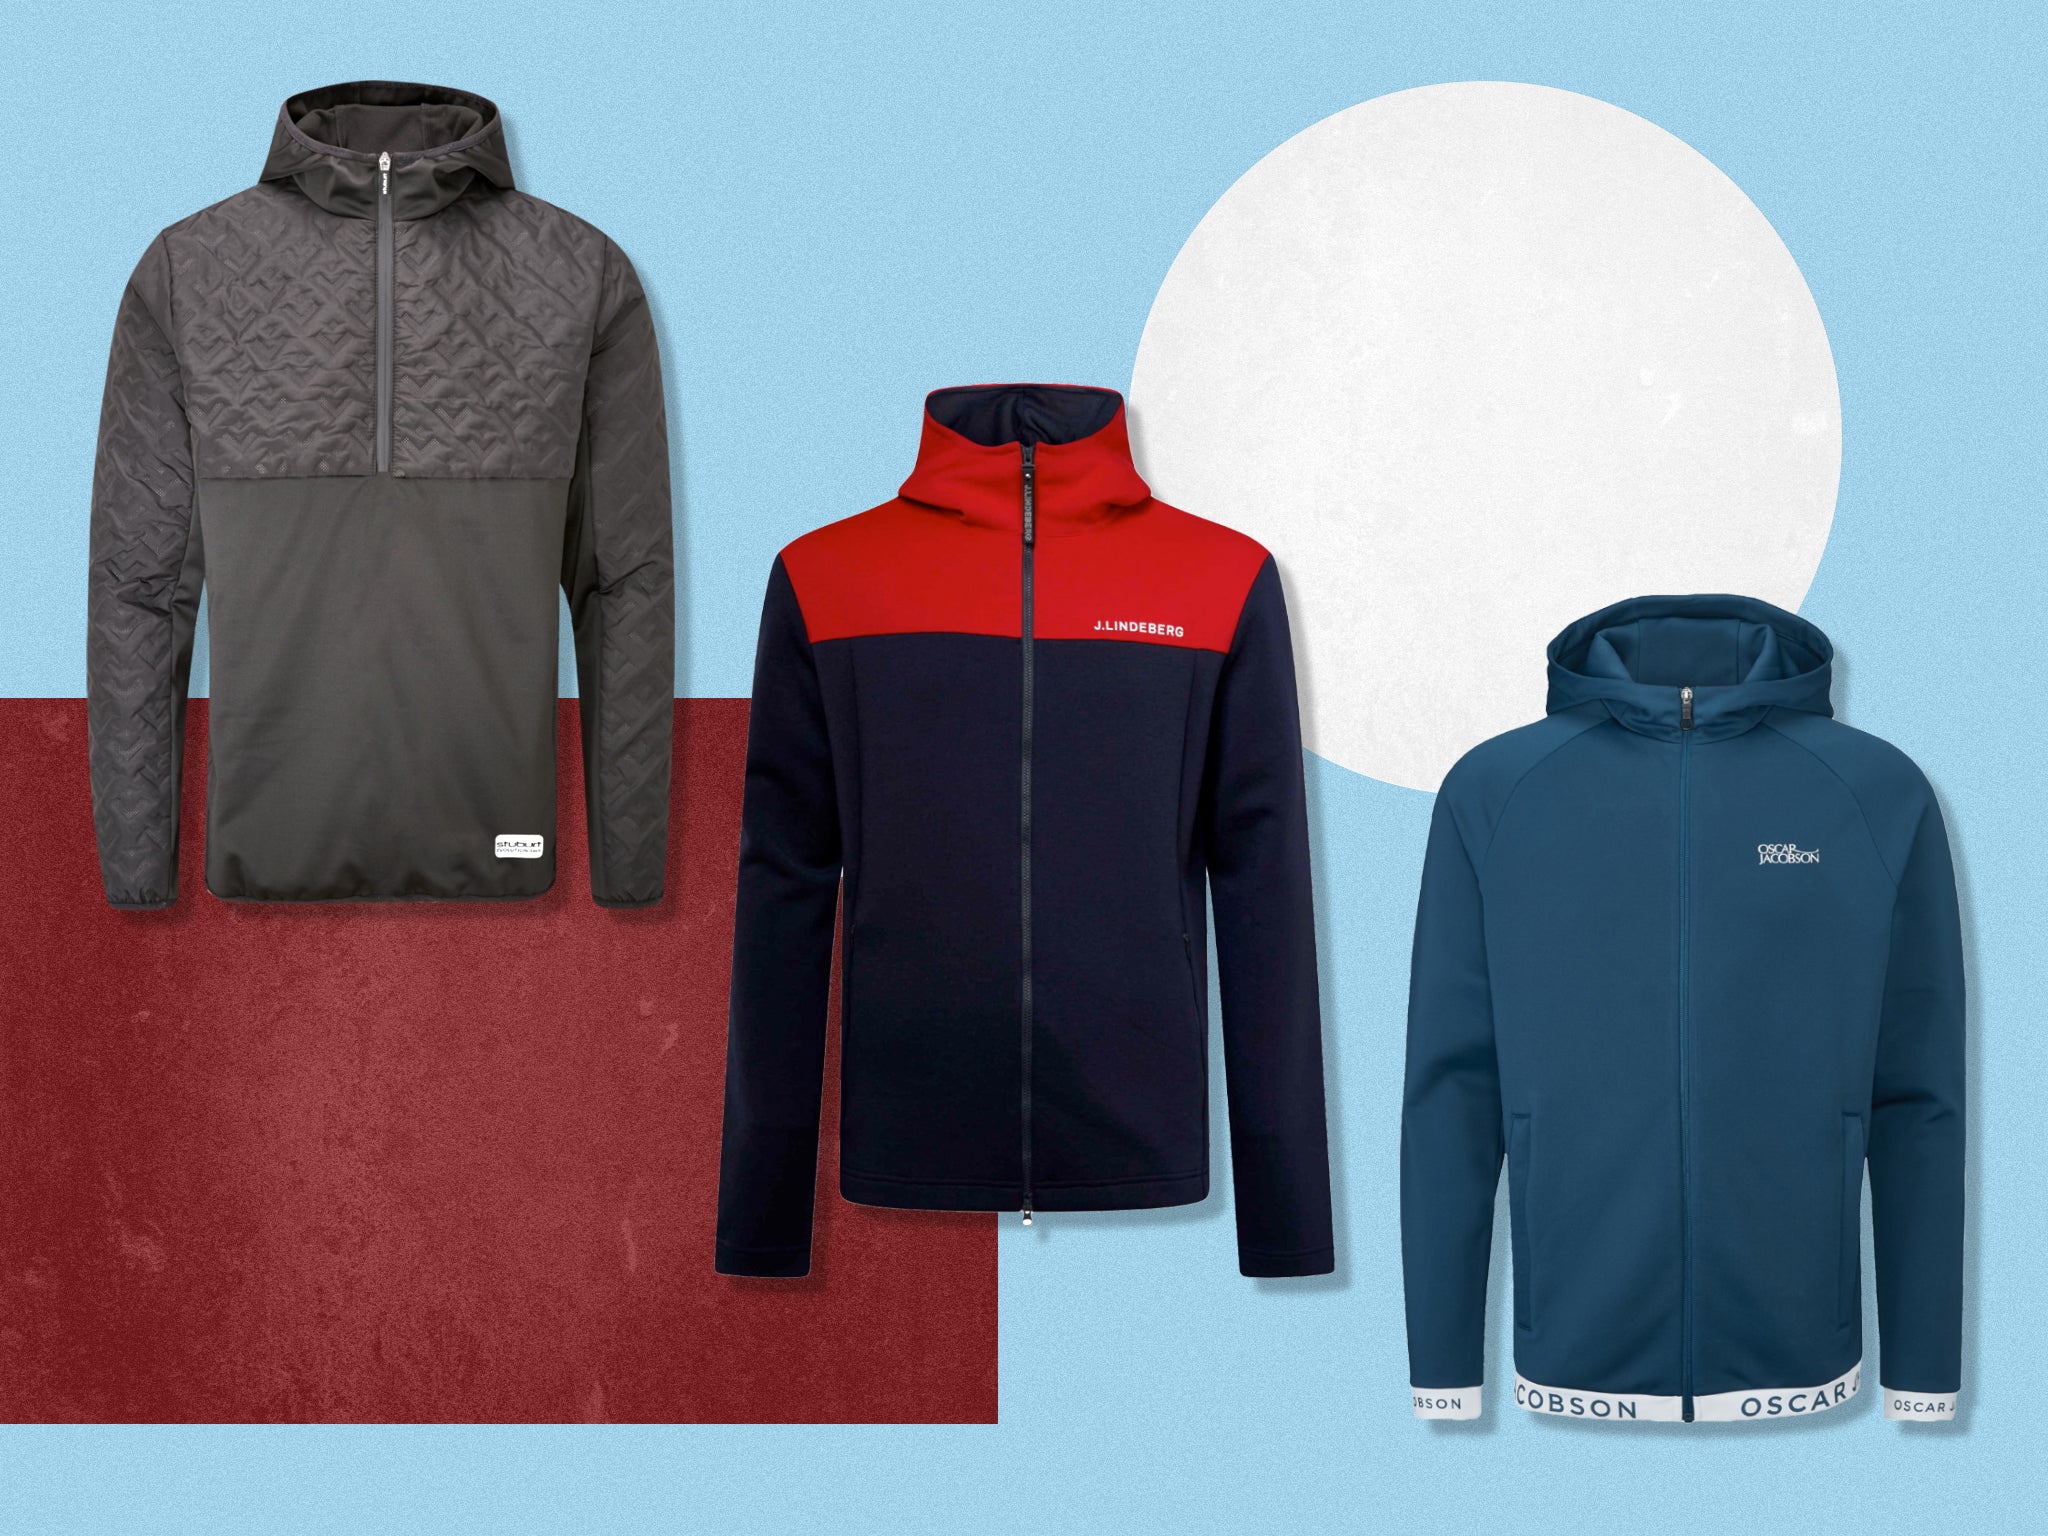 Best golf hoodies 2022: Men's gilets, sweaters and jackets